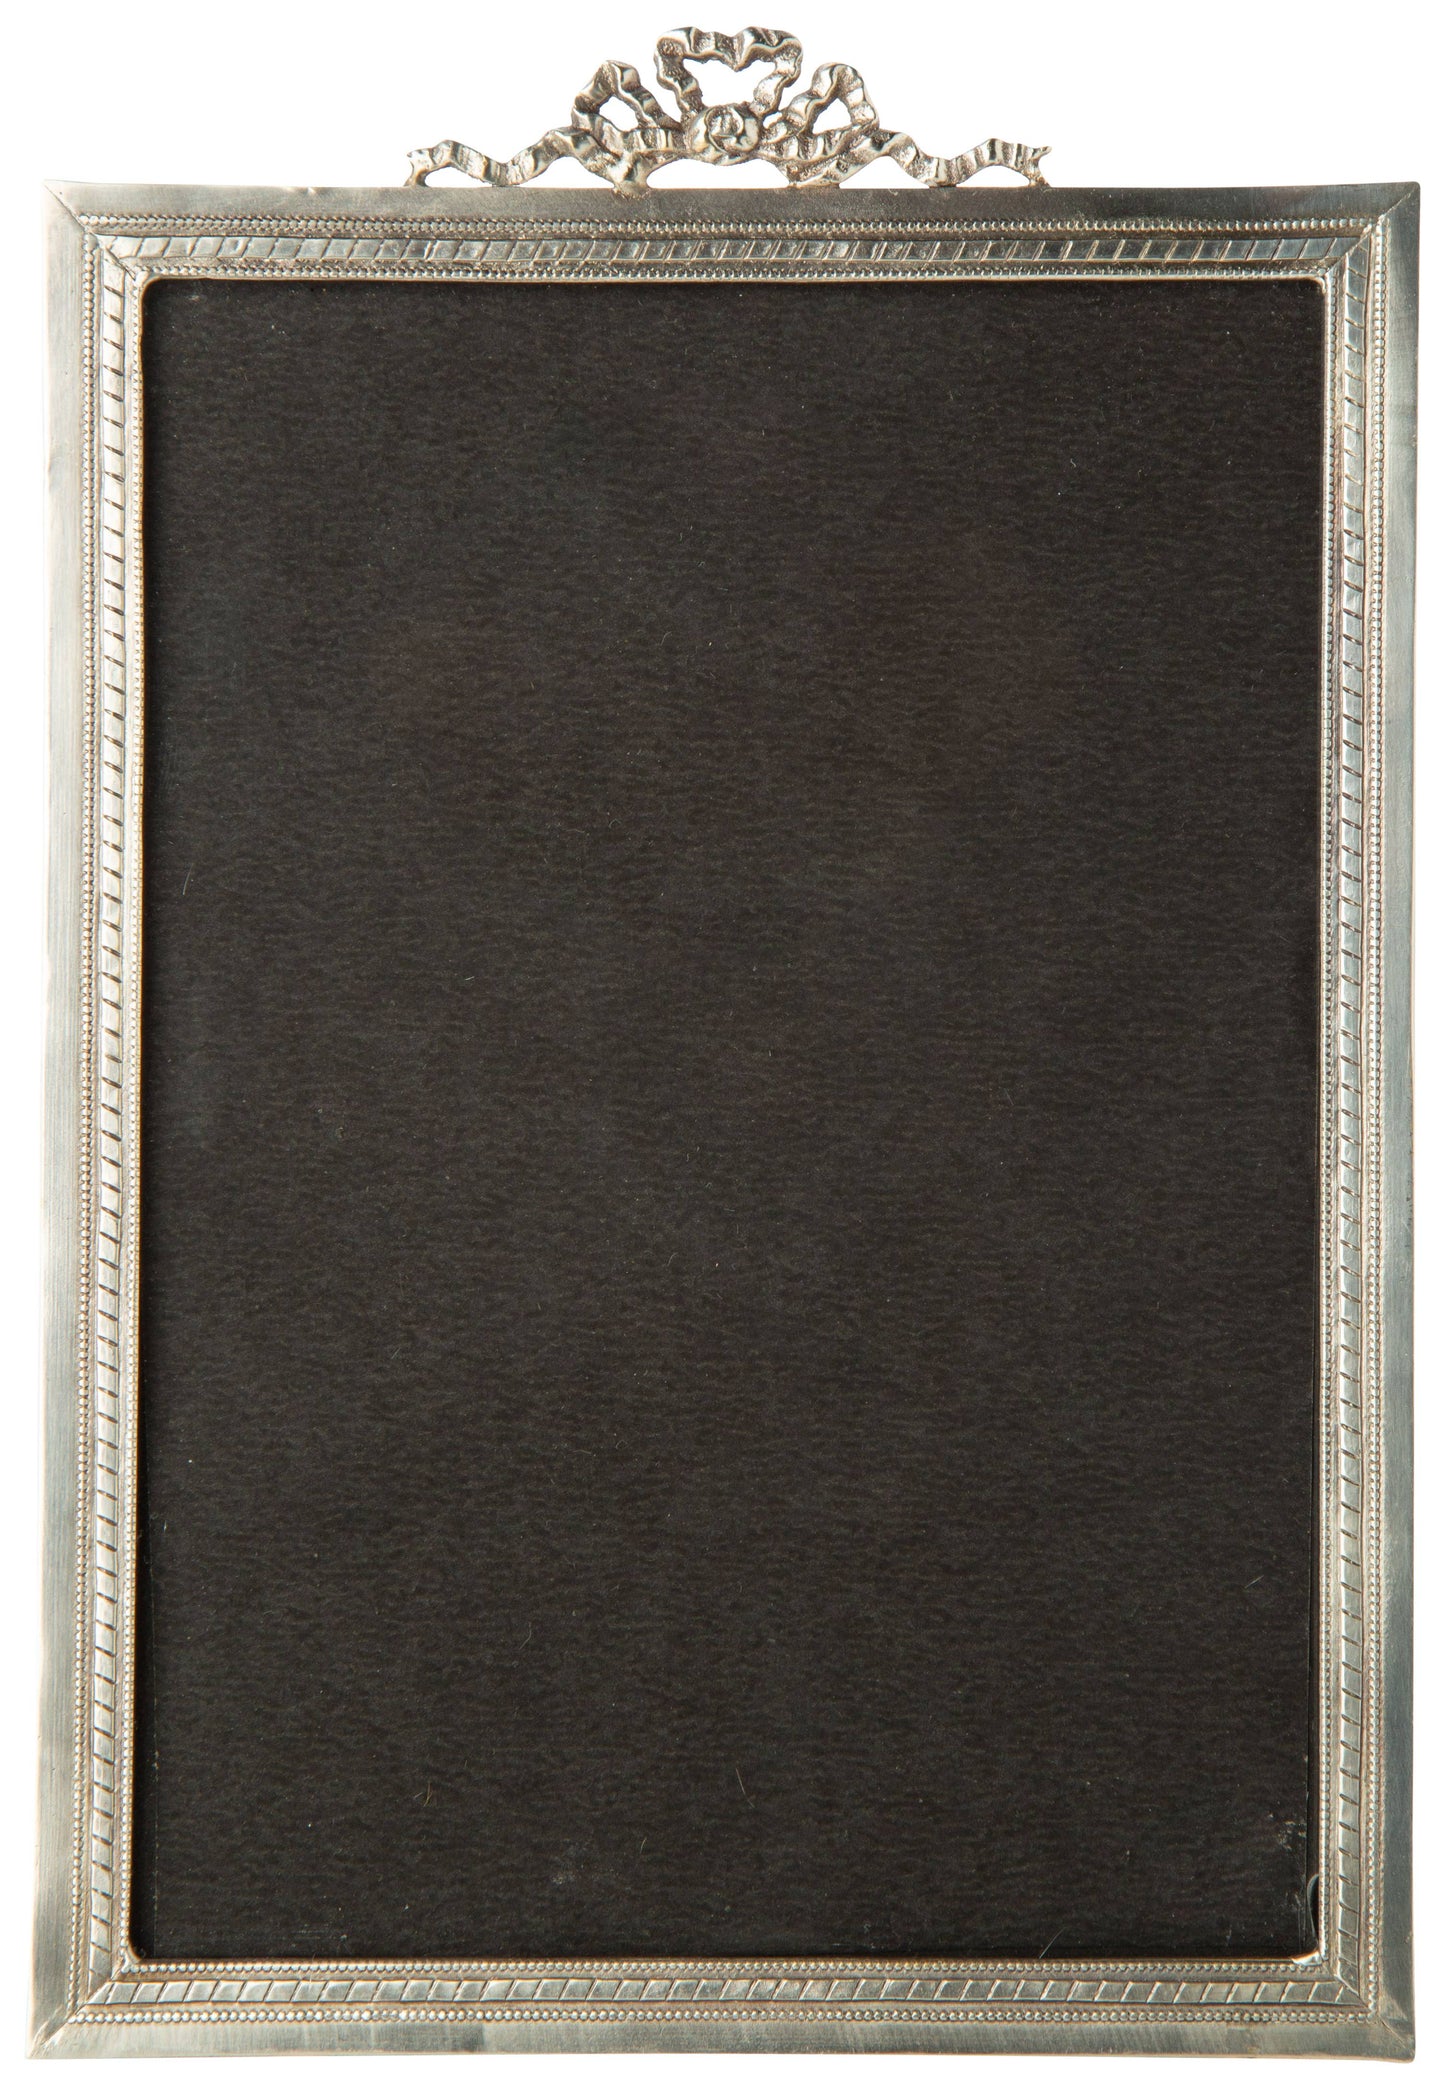 A92032 Rectangular metal picture frame with cast bow top